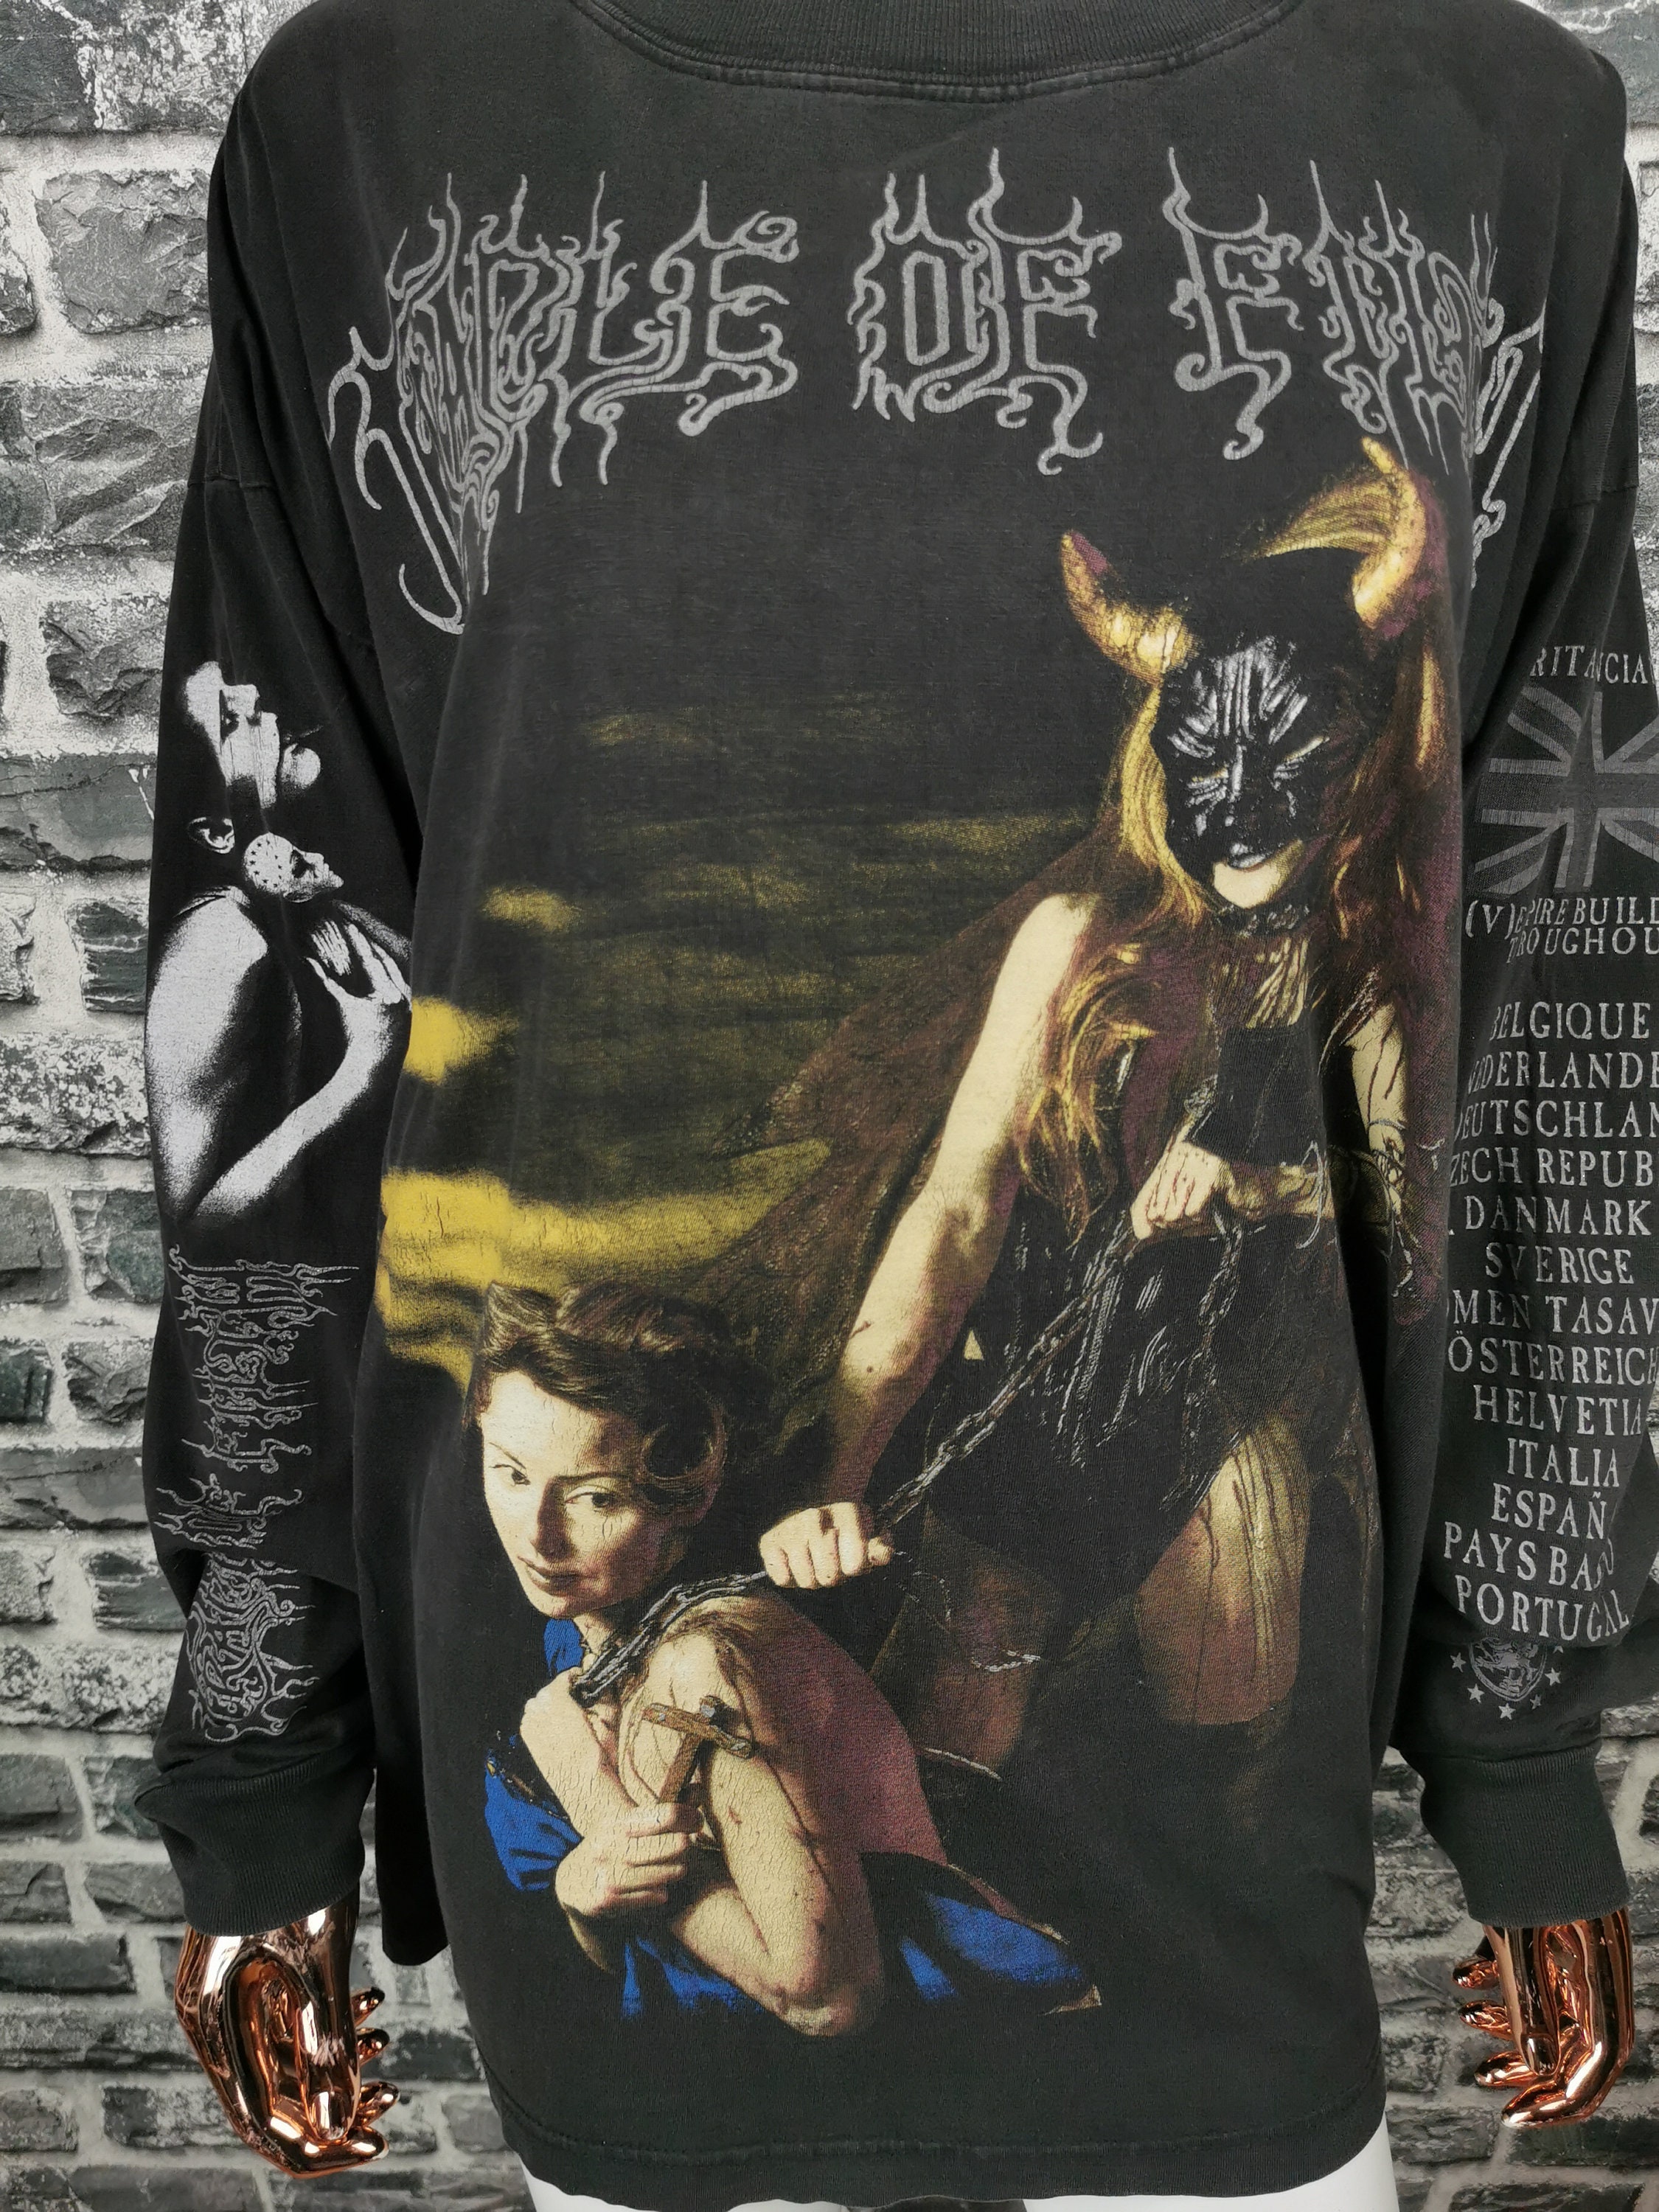 CRADLE OF FILTH 1997 Lonsgsleeve Shirt the Rape and - Etsy